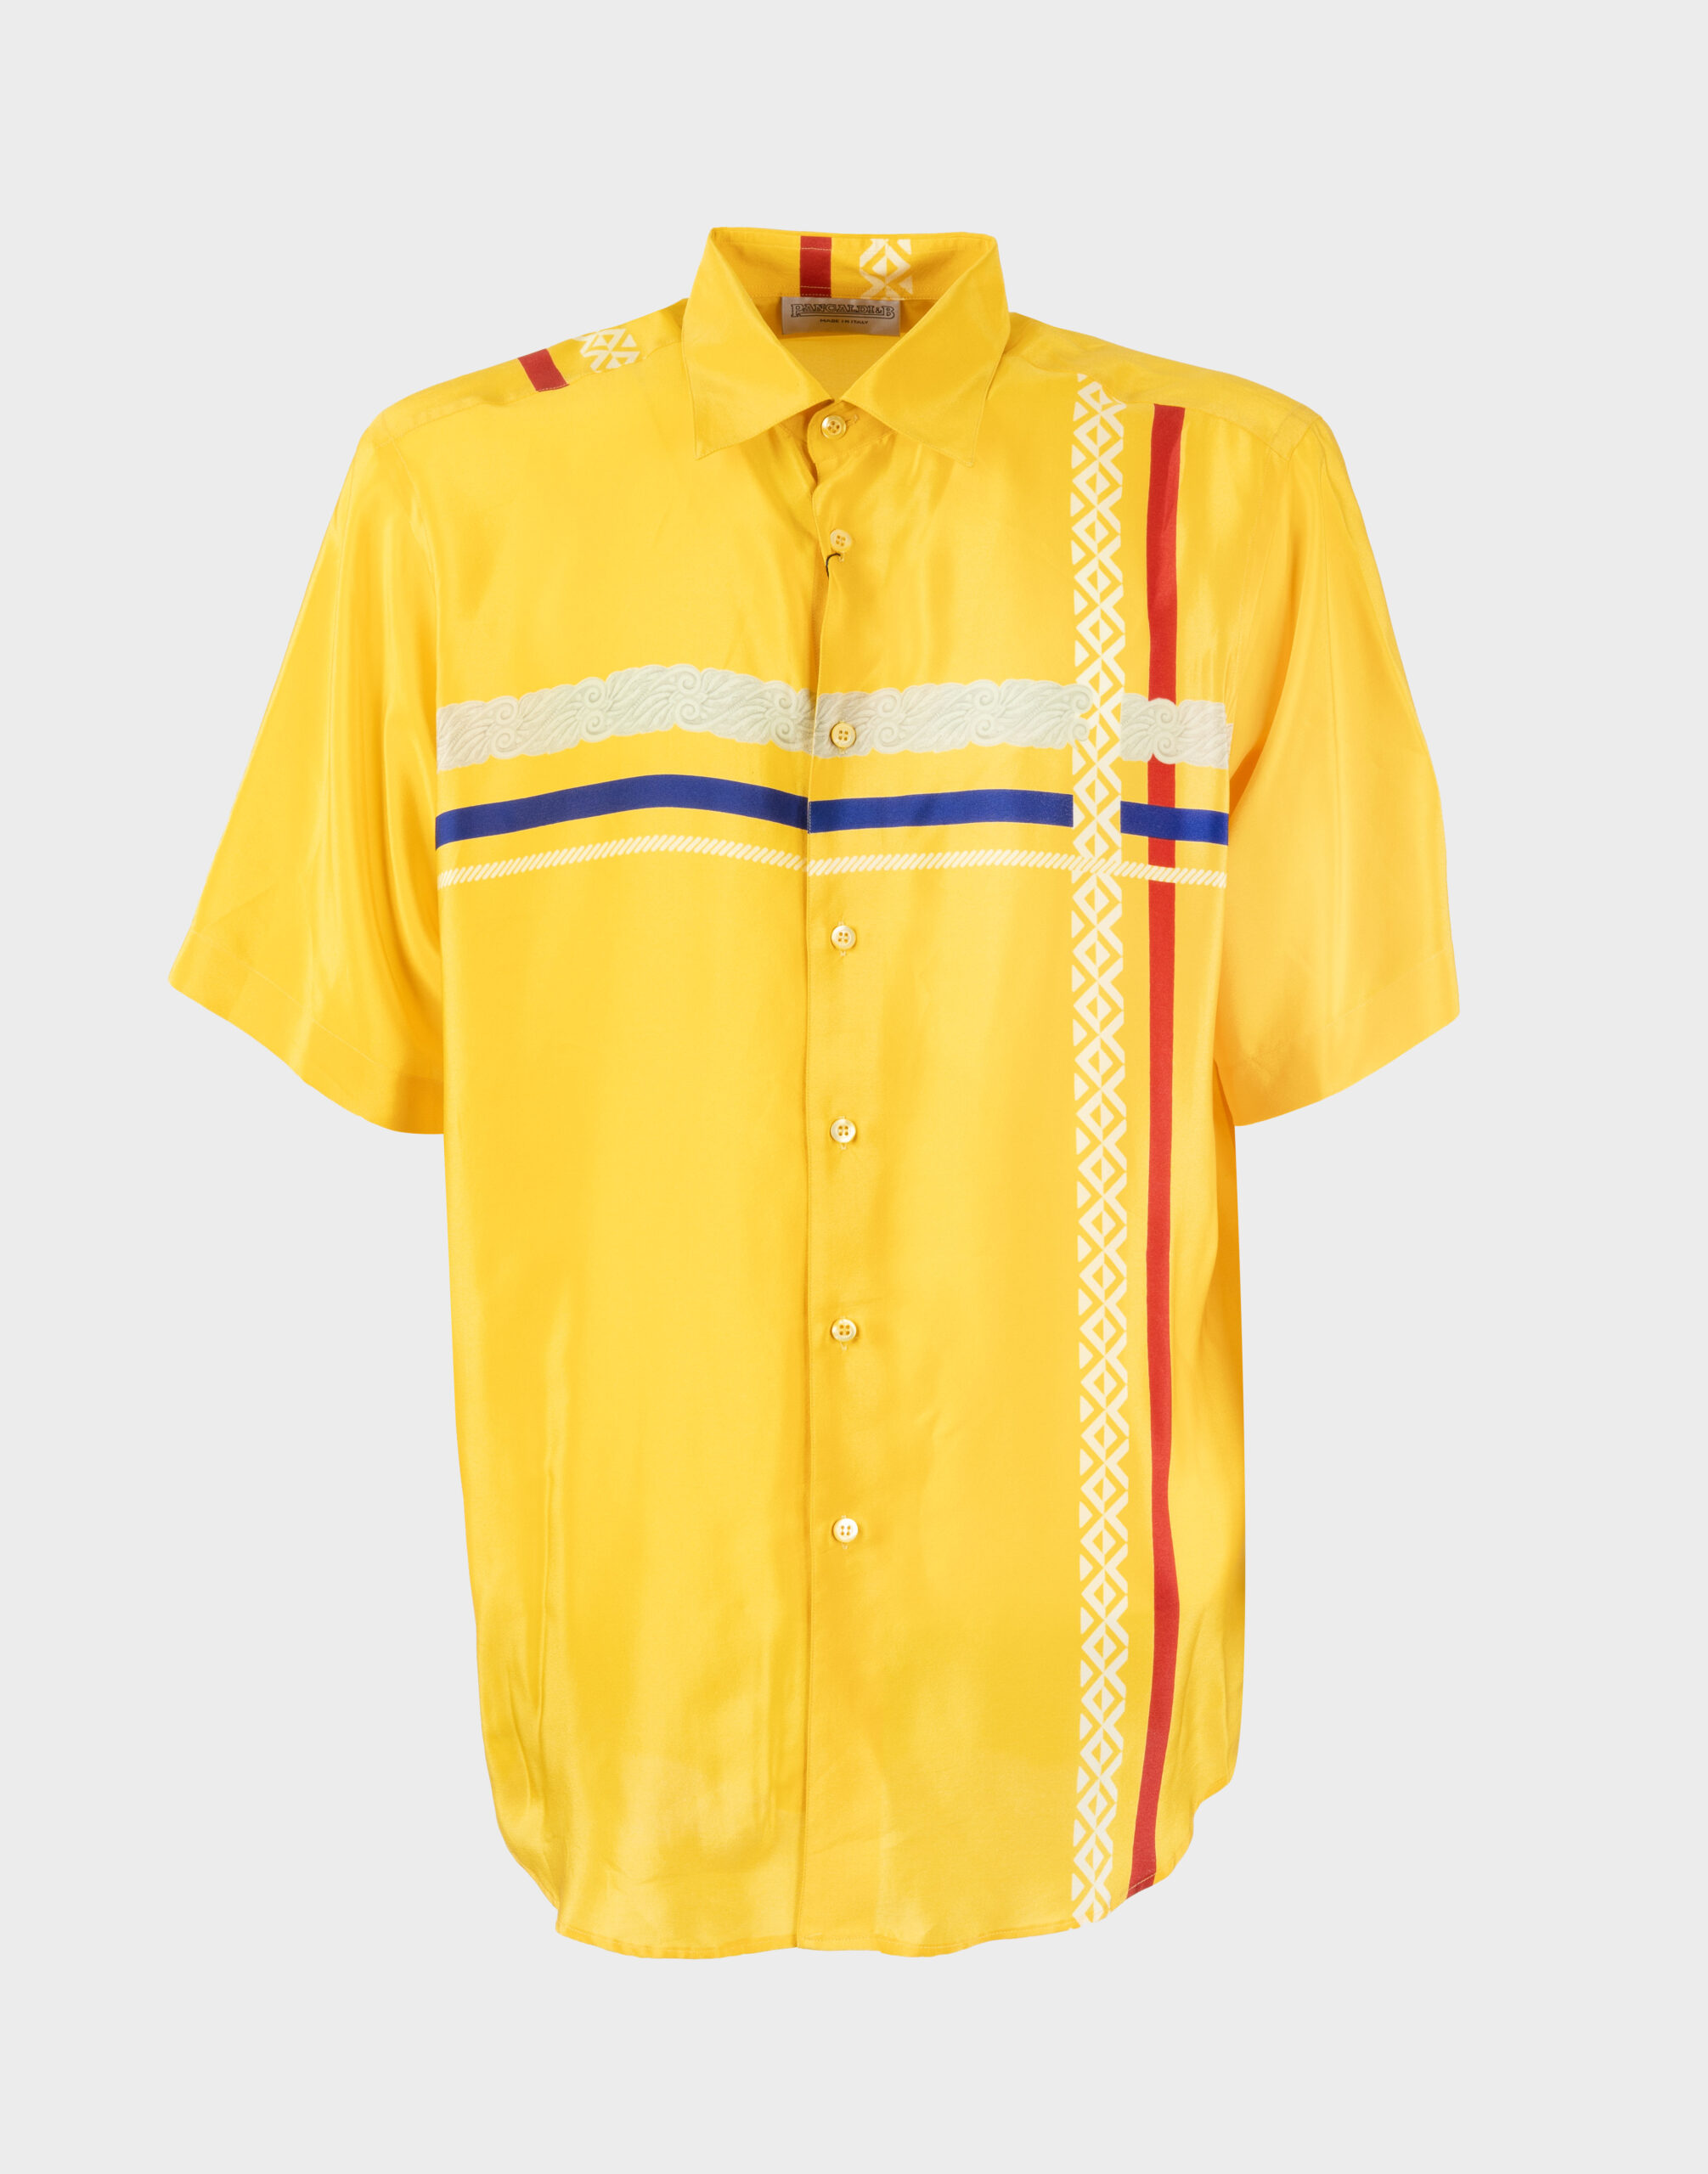 short-sleeved yellow men's shirt with coloured pattern on the front